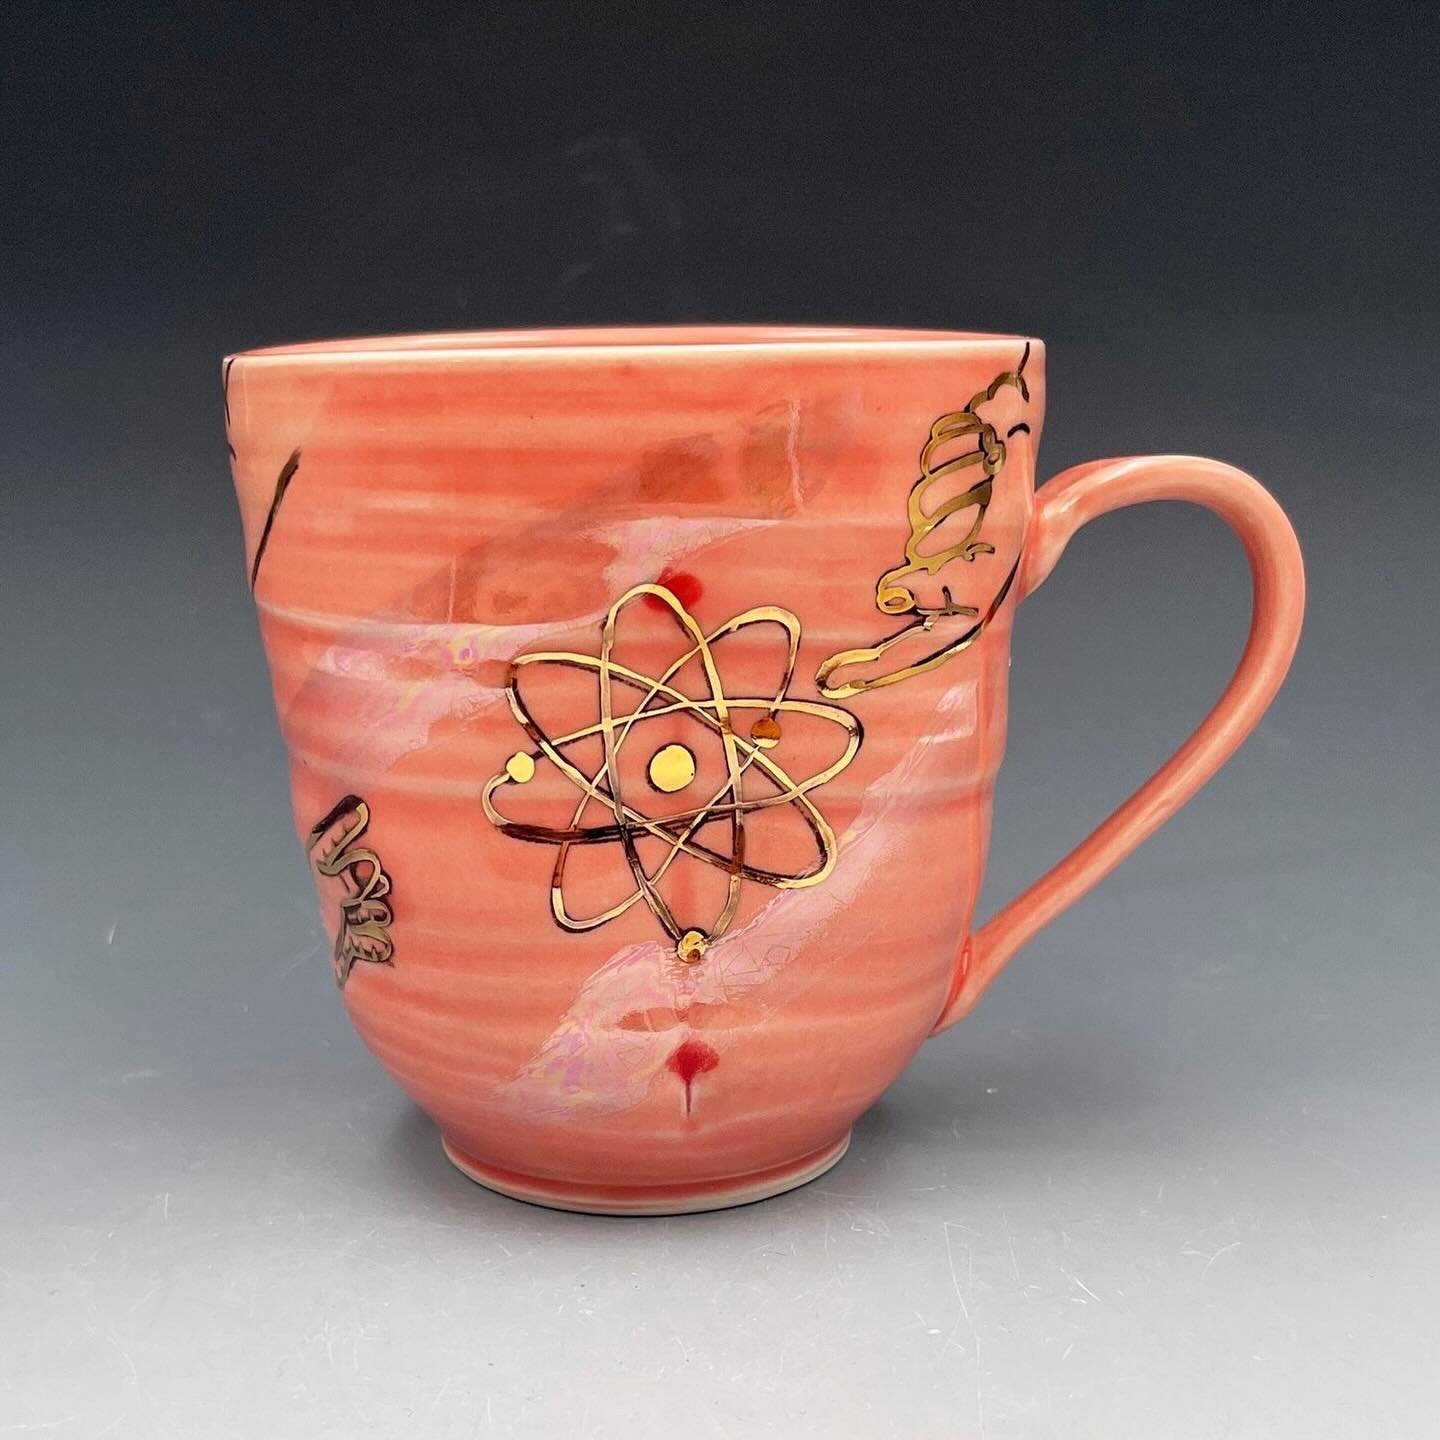 Still thinking about that Lynn Goodman mug you saw at our NCECA booth? Here&rsquo;s your chance to get one! 

Newly uploaded to Clay Art Center Shop are the Atomic Mug, Sky Blue Squirrel Mug, and the Sparrow Mug. Each one is wheel thrown porcelain wi